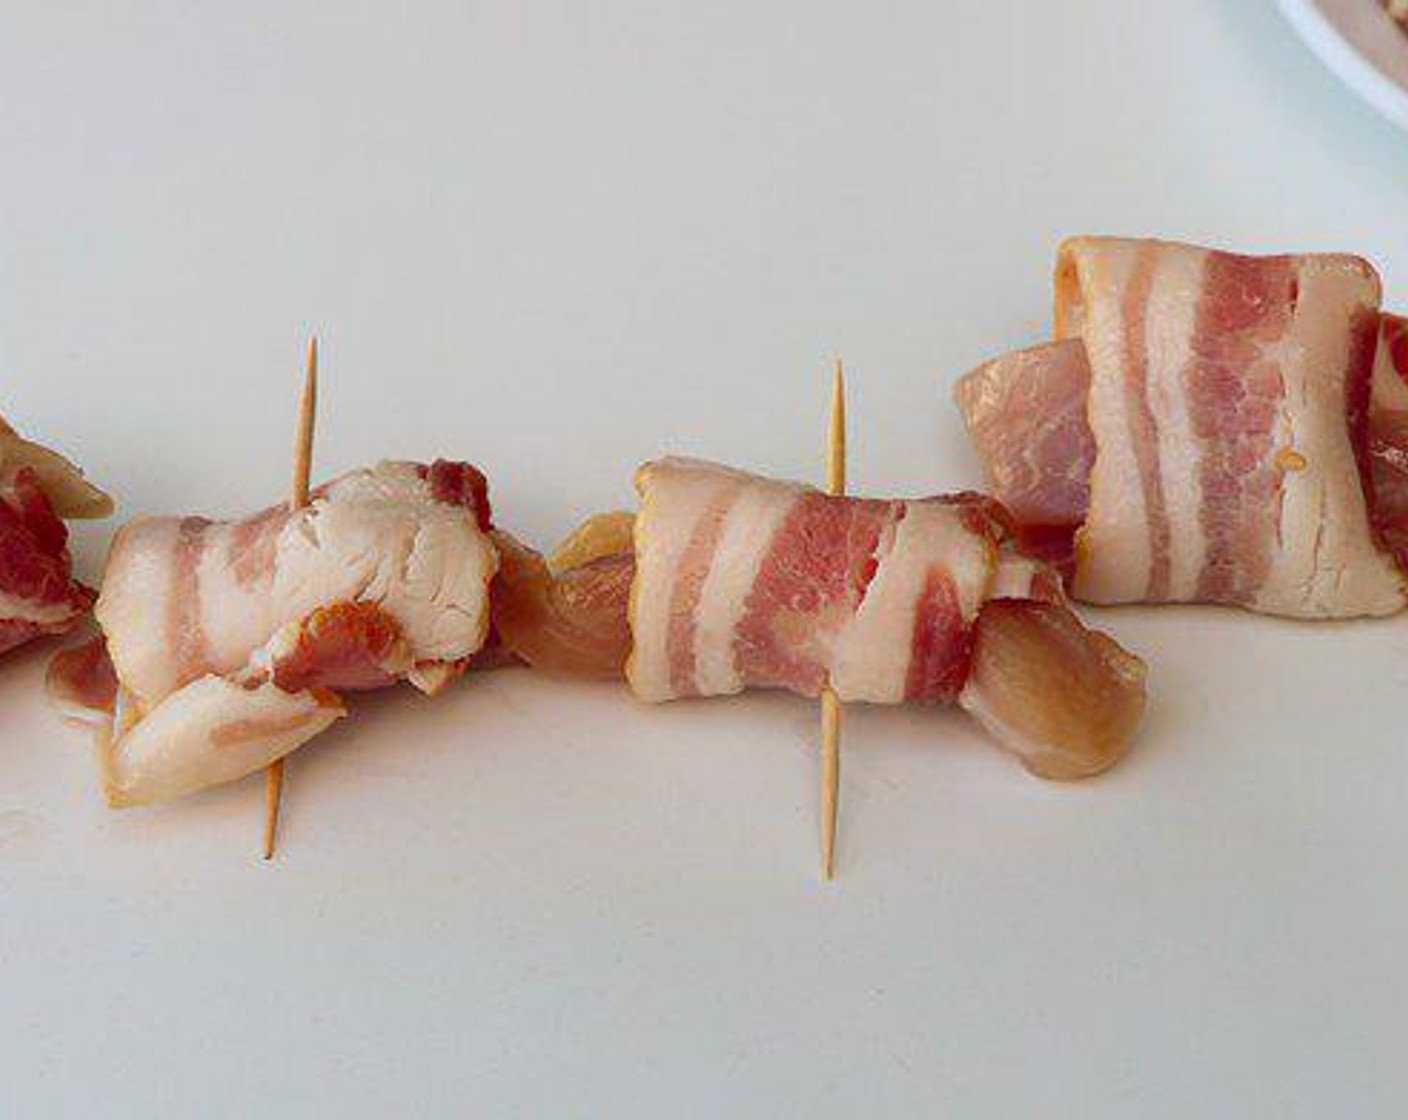 step 2 Cut each Boneless, Skinless Chicken Thigh (1 lb) into bite size portions. Wrap each piece with ½ slice of Bacon (12 slices) and secure with a toothpick.